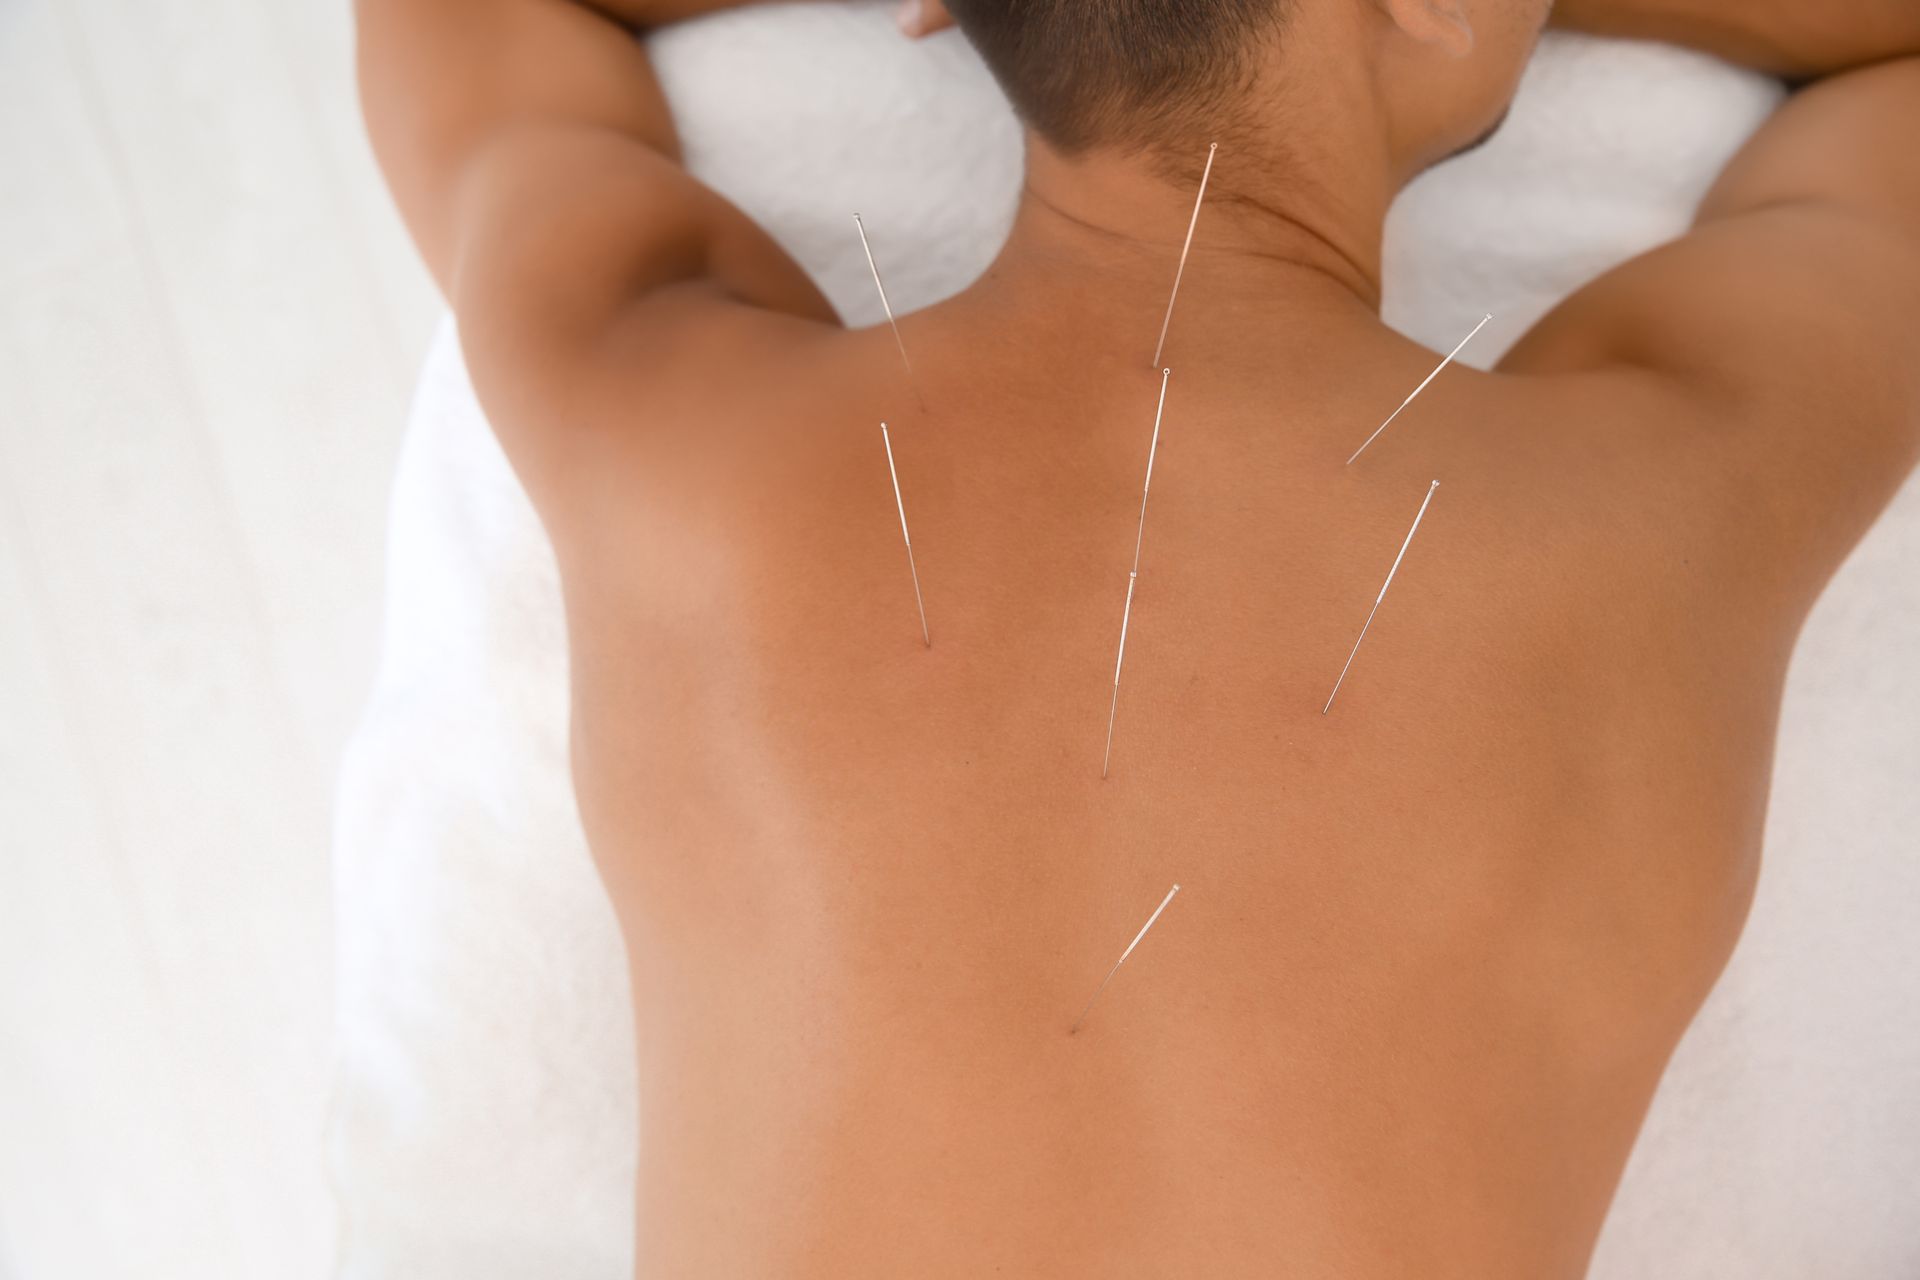 A man is getting acupuncture on his back to promote male fertility and improve sperm quality